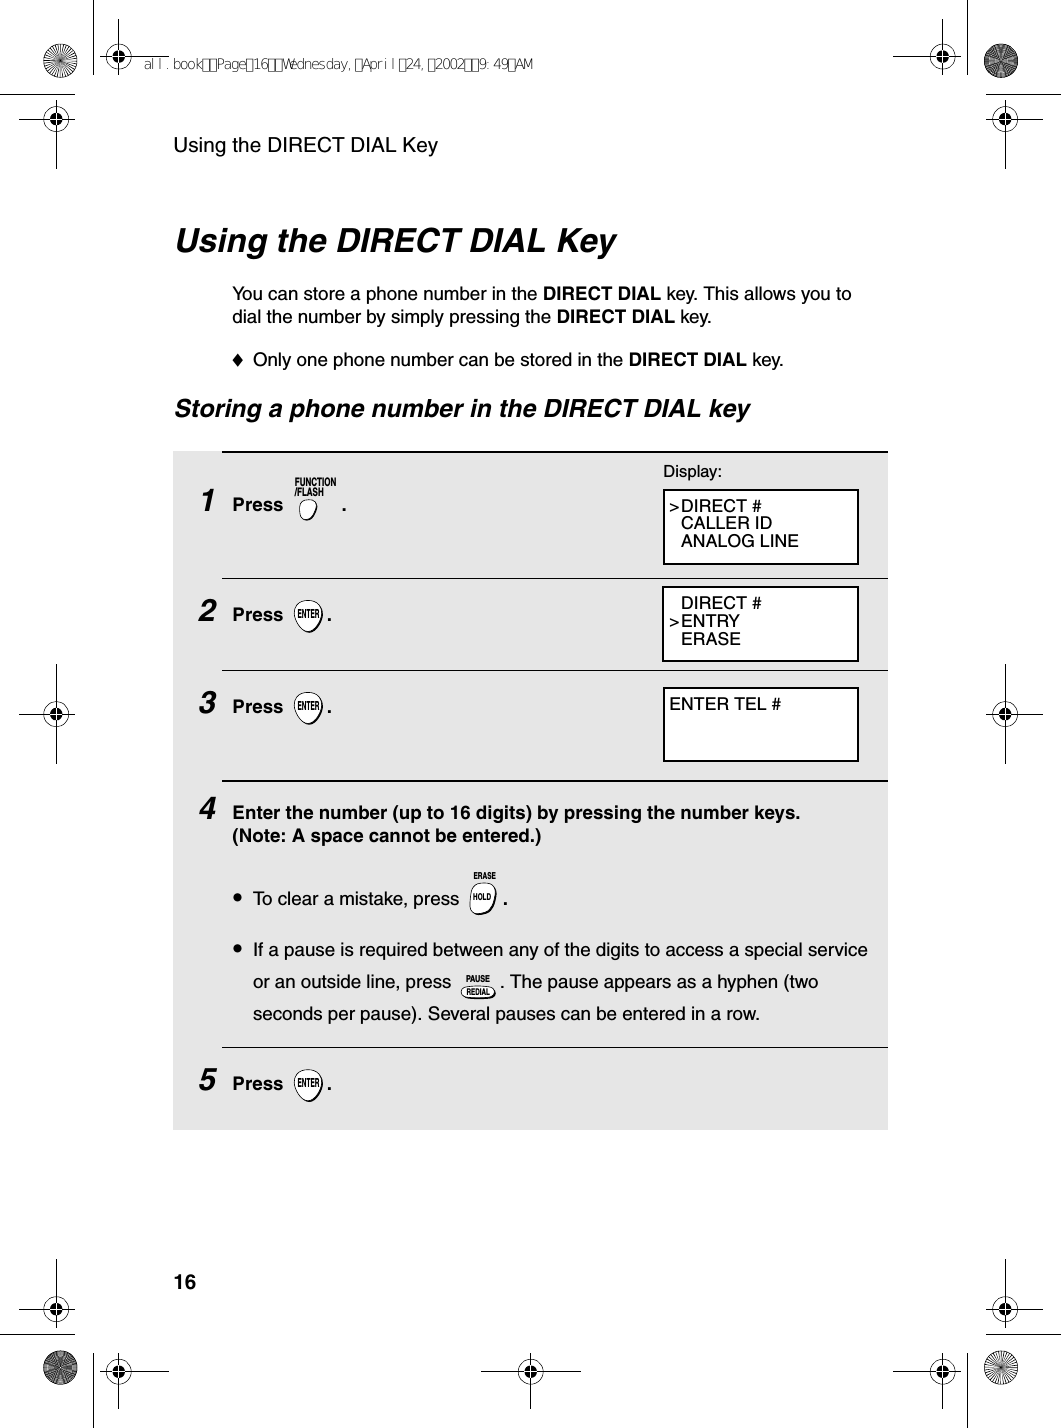 Using the DIRECT DIAL Key16Using the DIRECT DIAL KeyYou can store a phone number in the DIRECT DIAL key. This allows you to dial the number by simply pressing the DIRECT DIAL key.♦Only one phone number can be stored in the DIRECT DIAL key.Storing a phone number in the DIRECT DIAL key1Press . 2Press .3Press .4    Enter the number (up to 16 digits) by pressing the number keys. (Note: A space cannot be entered.)•To clear a mistake, press  .•If a pause is required between any of the digits to access a special service or an outside line, press  . The pause appears as a hyphen (two seconds per pause). Several pauses can be entered in a row.5Press .FUNCTION/FLASHENTERENTERHOLDERASEREDIALPAUSEENTERDisplay:&gt;DIRECT #CALLER IDANALOG LINEDIRECT #&gt;ENTRYERASEENTER TEL #all.bookPage16Wednesday,April24,20029:49AM